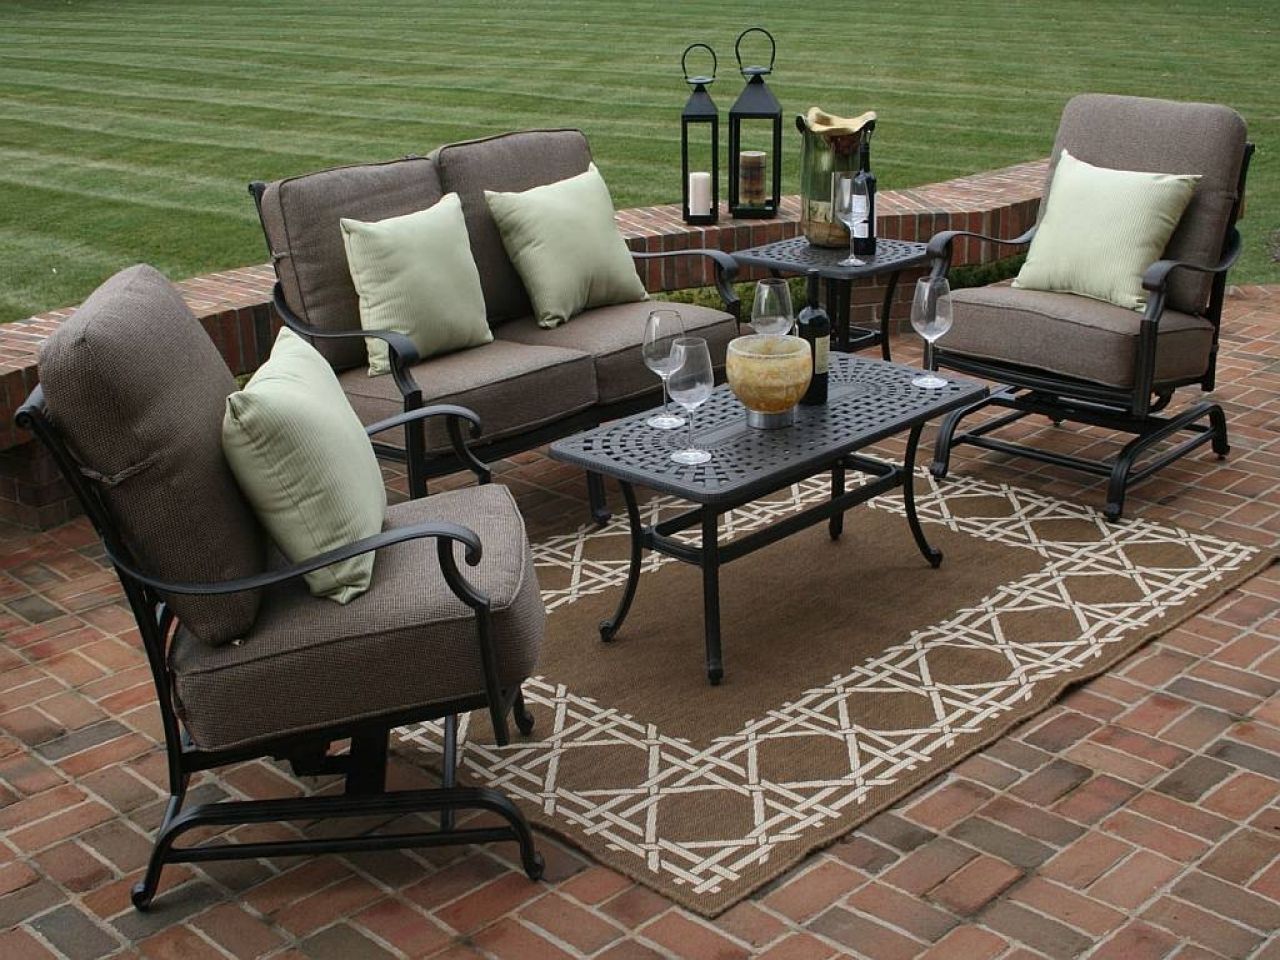 Fashionable How To Make Patio Furniture Sets — The Home Redesign Inside Nfm Patio Conversation Sets (View 1 of 15)